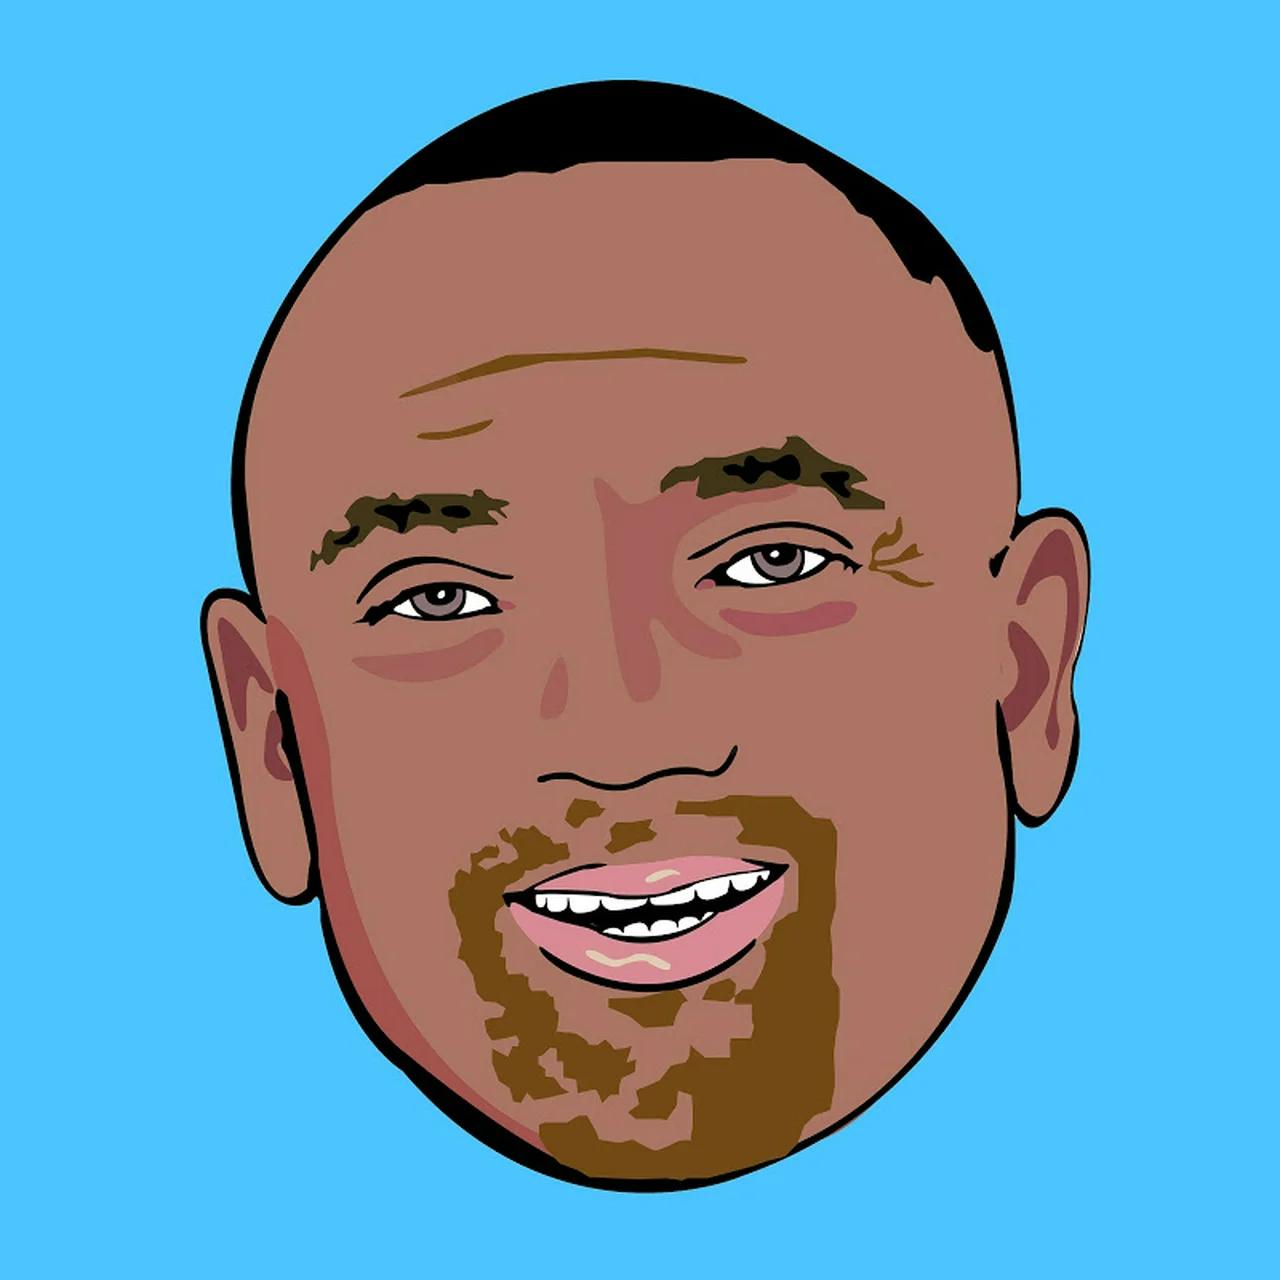 Ready go to ... https://odysee.com/@jesseleepeterson [ Jesse Lee Peterson]